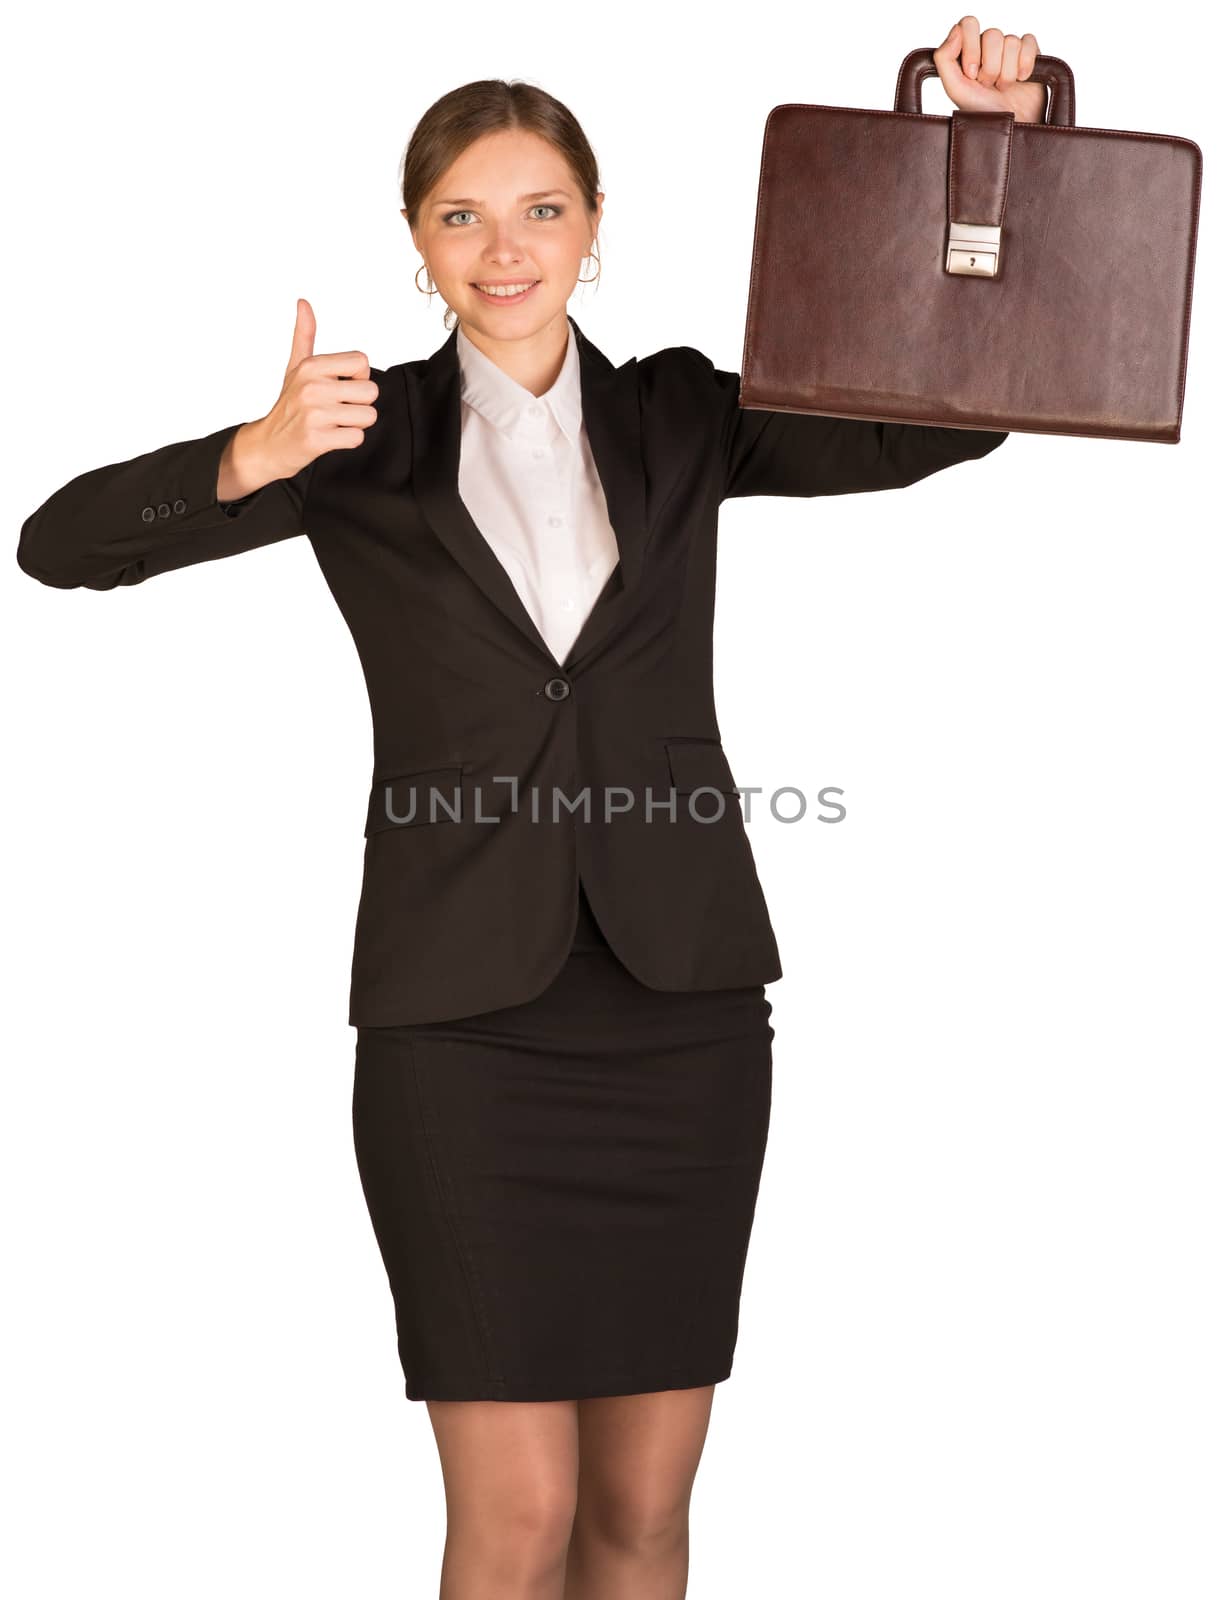 Businesswoman showing thumb up and holding briefcase. Isolated on white background